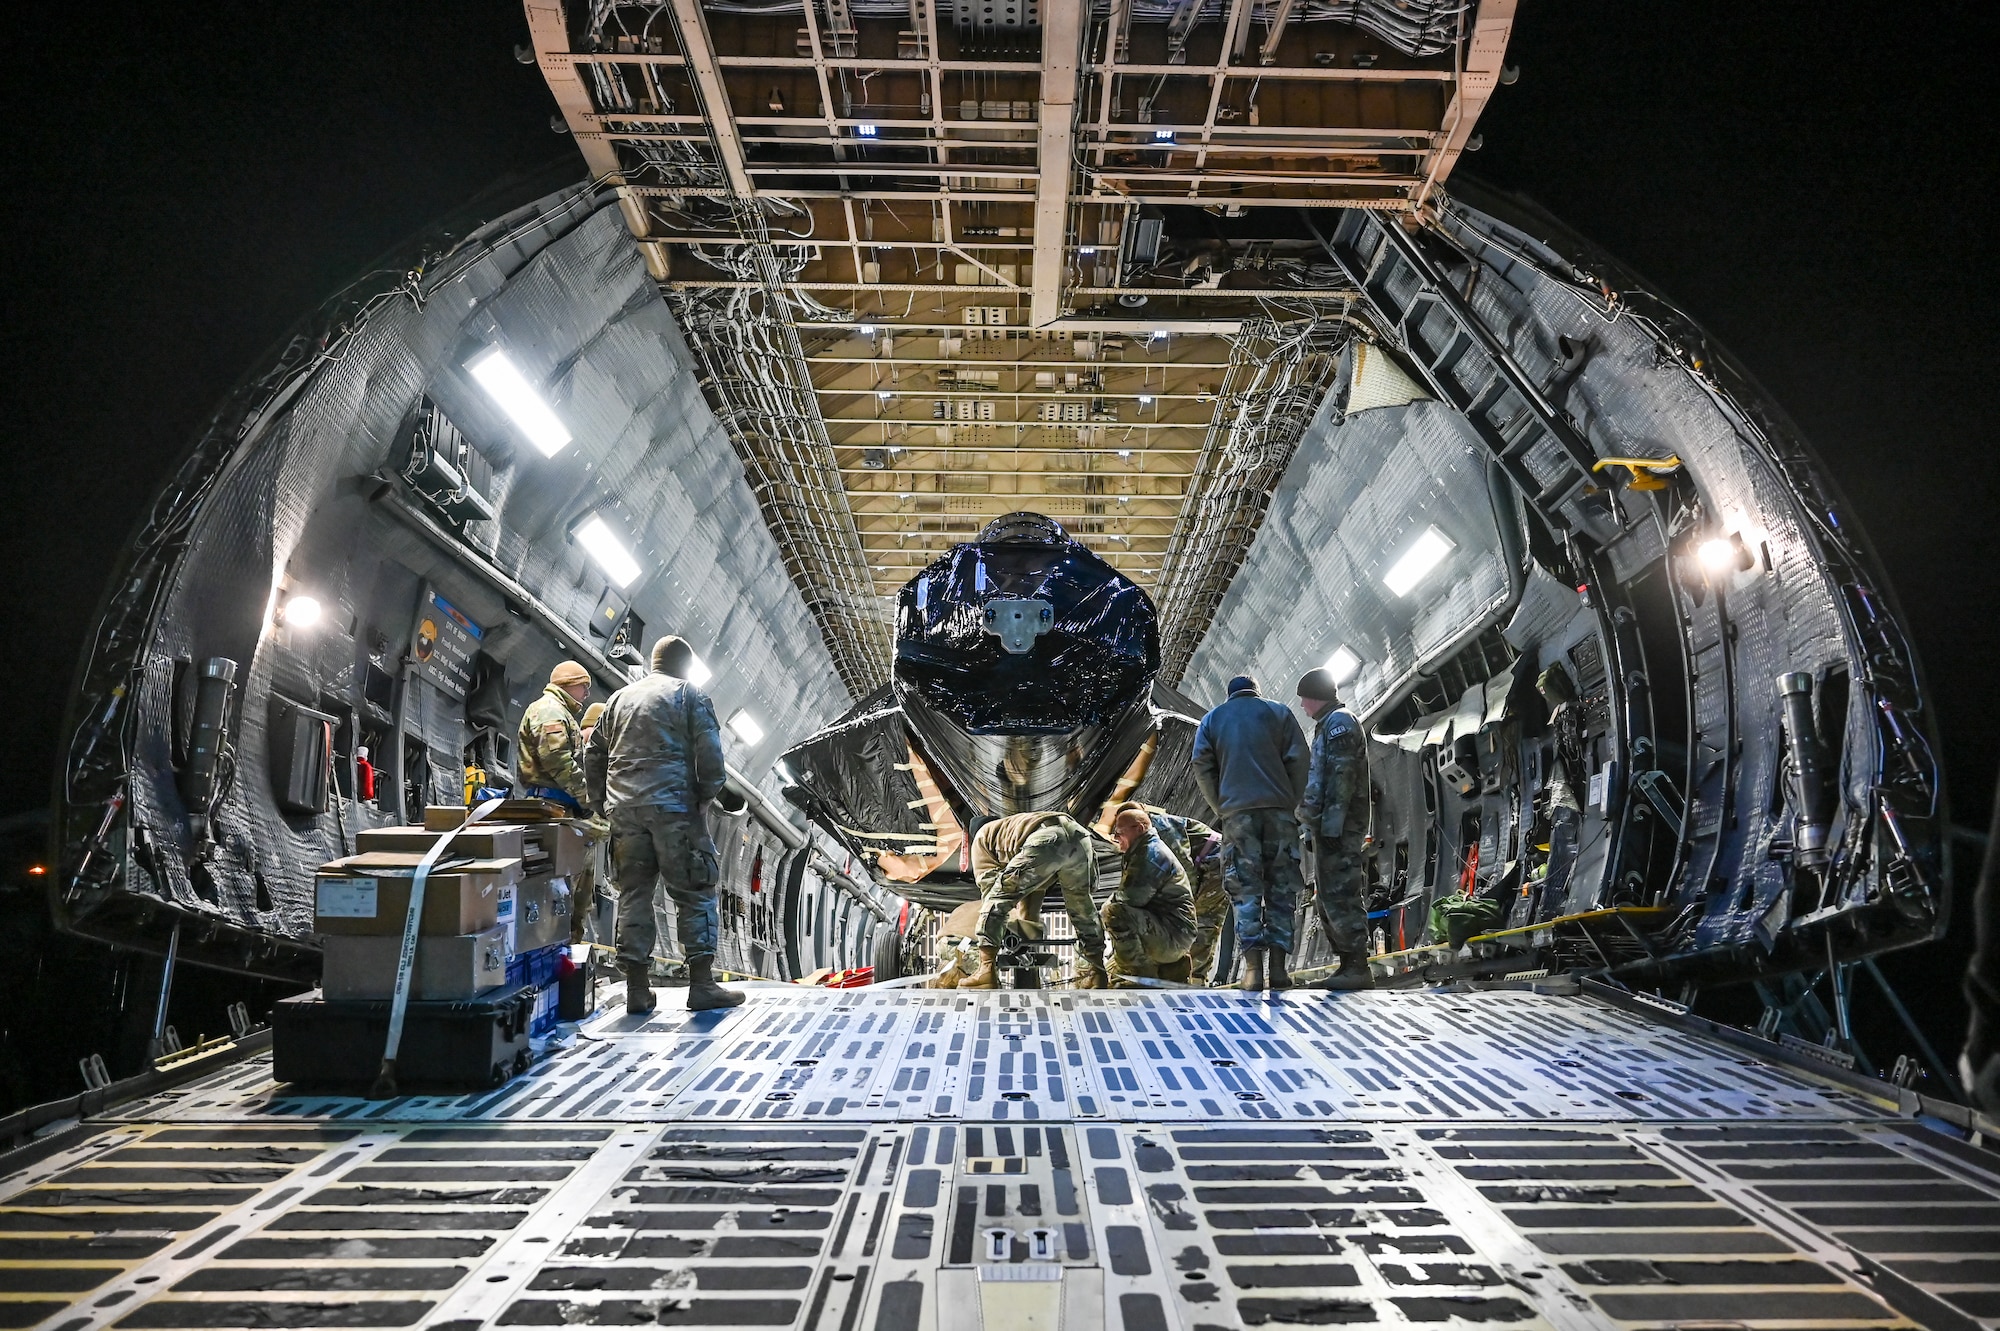 Airmen attach a hitch to the front wheel of an F-22 Raptor fuselage inside a C-5M Galaxy